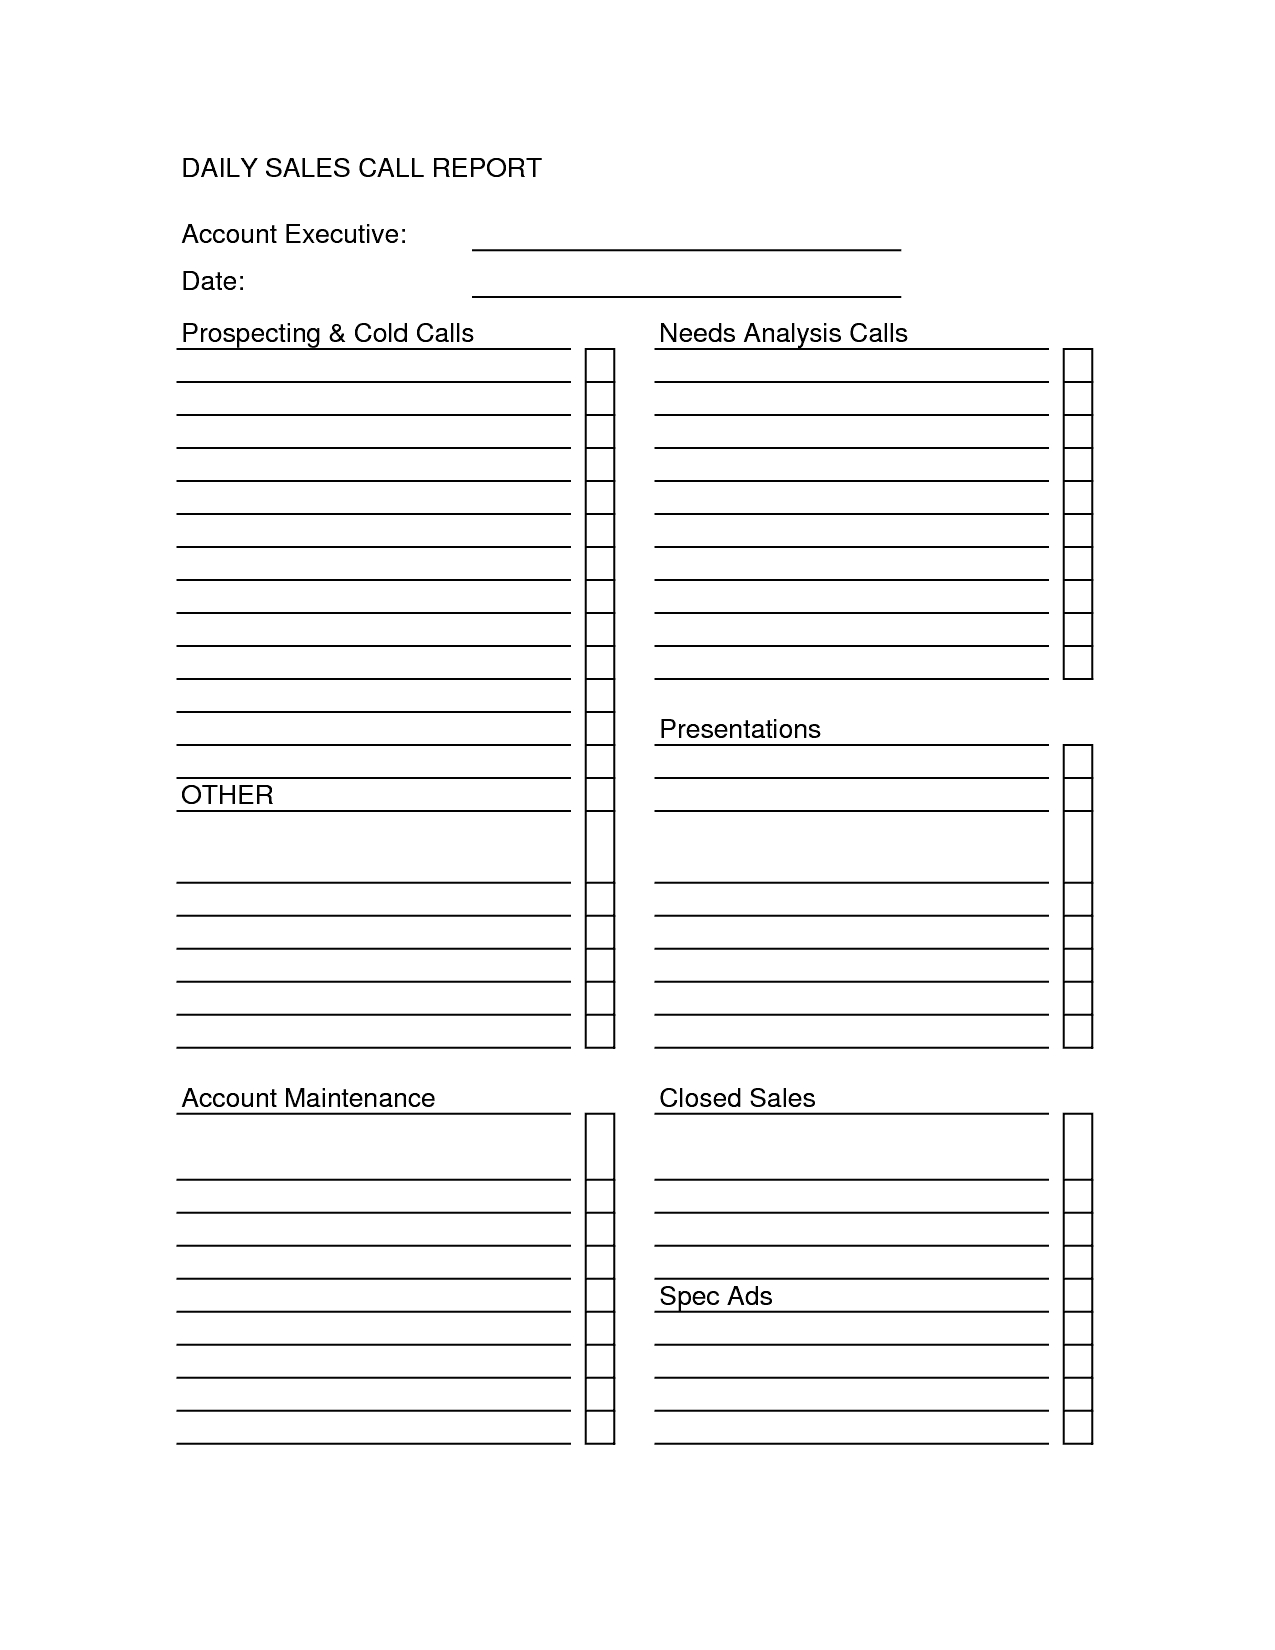 Sales Call Report Templates - Word Excel Fomats With Sales Rep Call Report Template